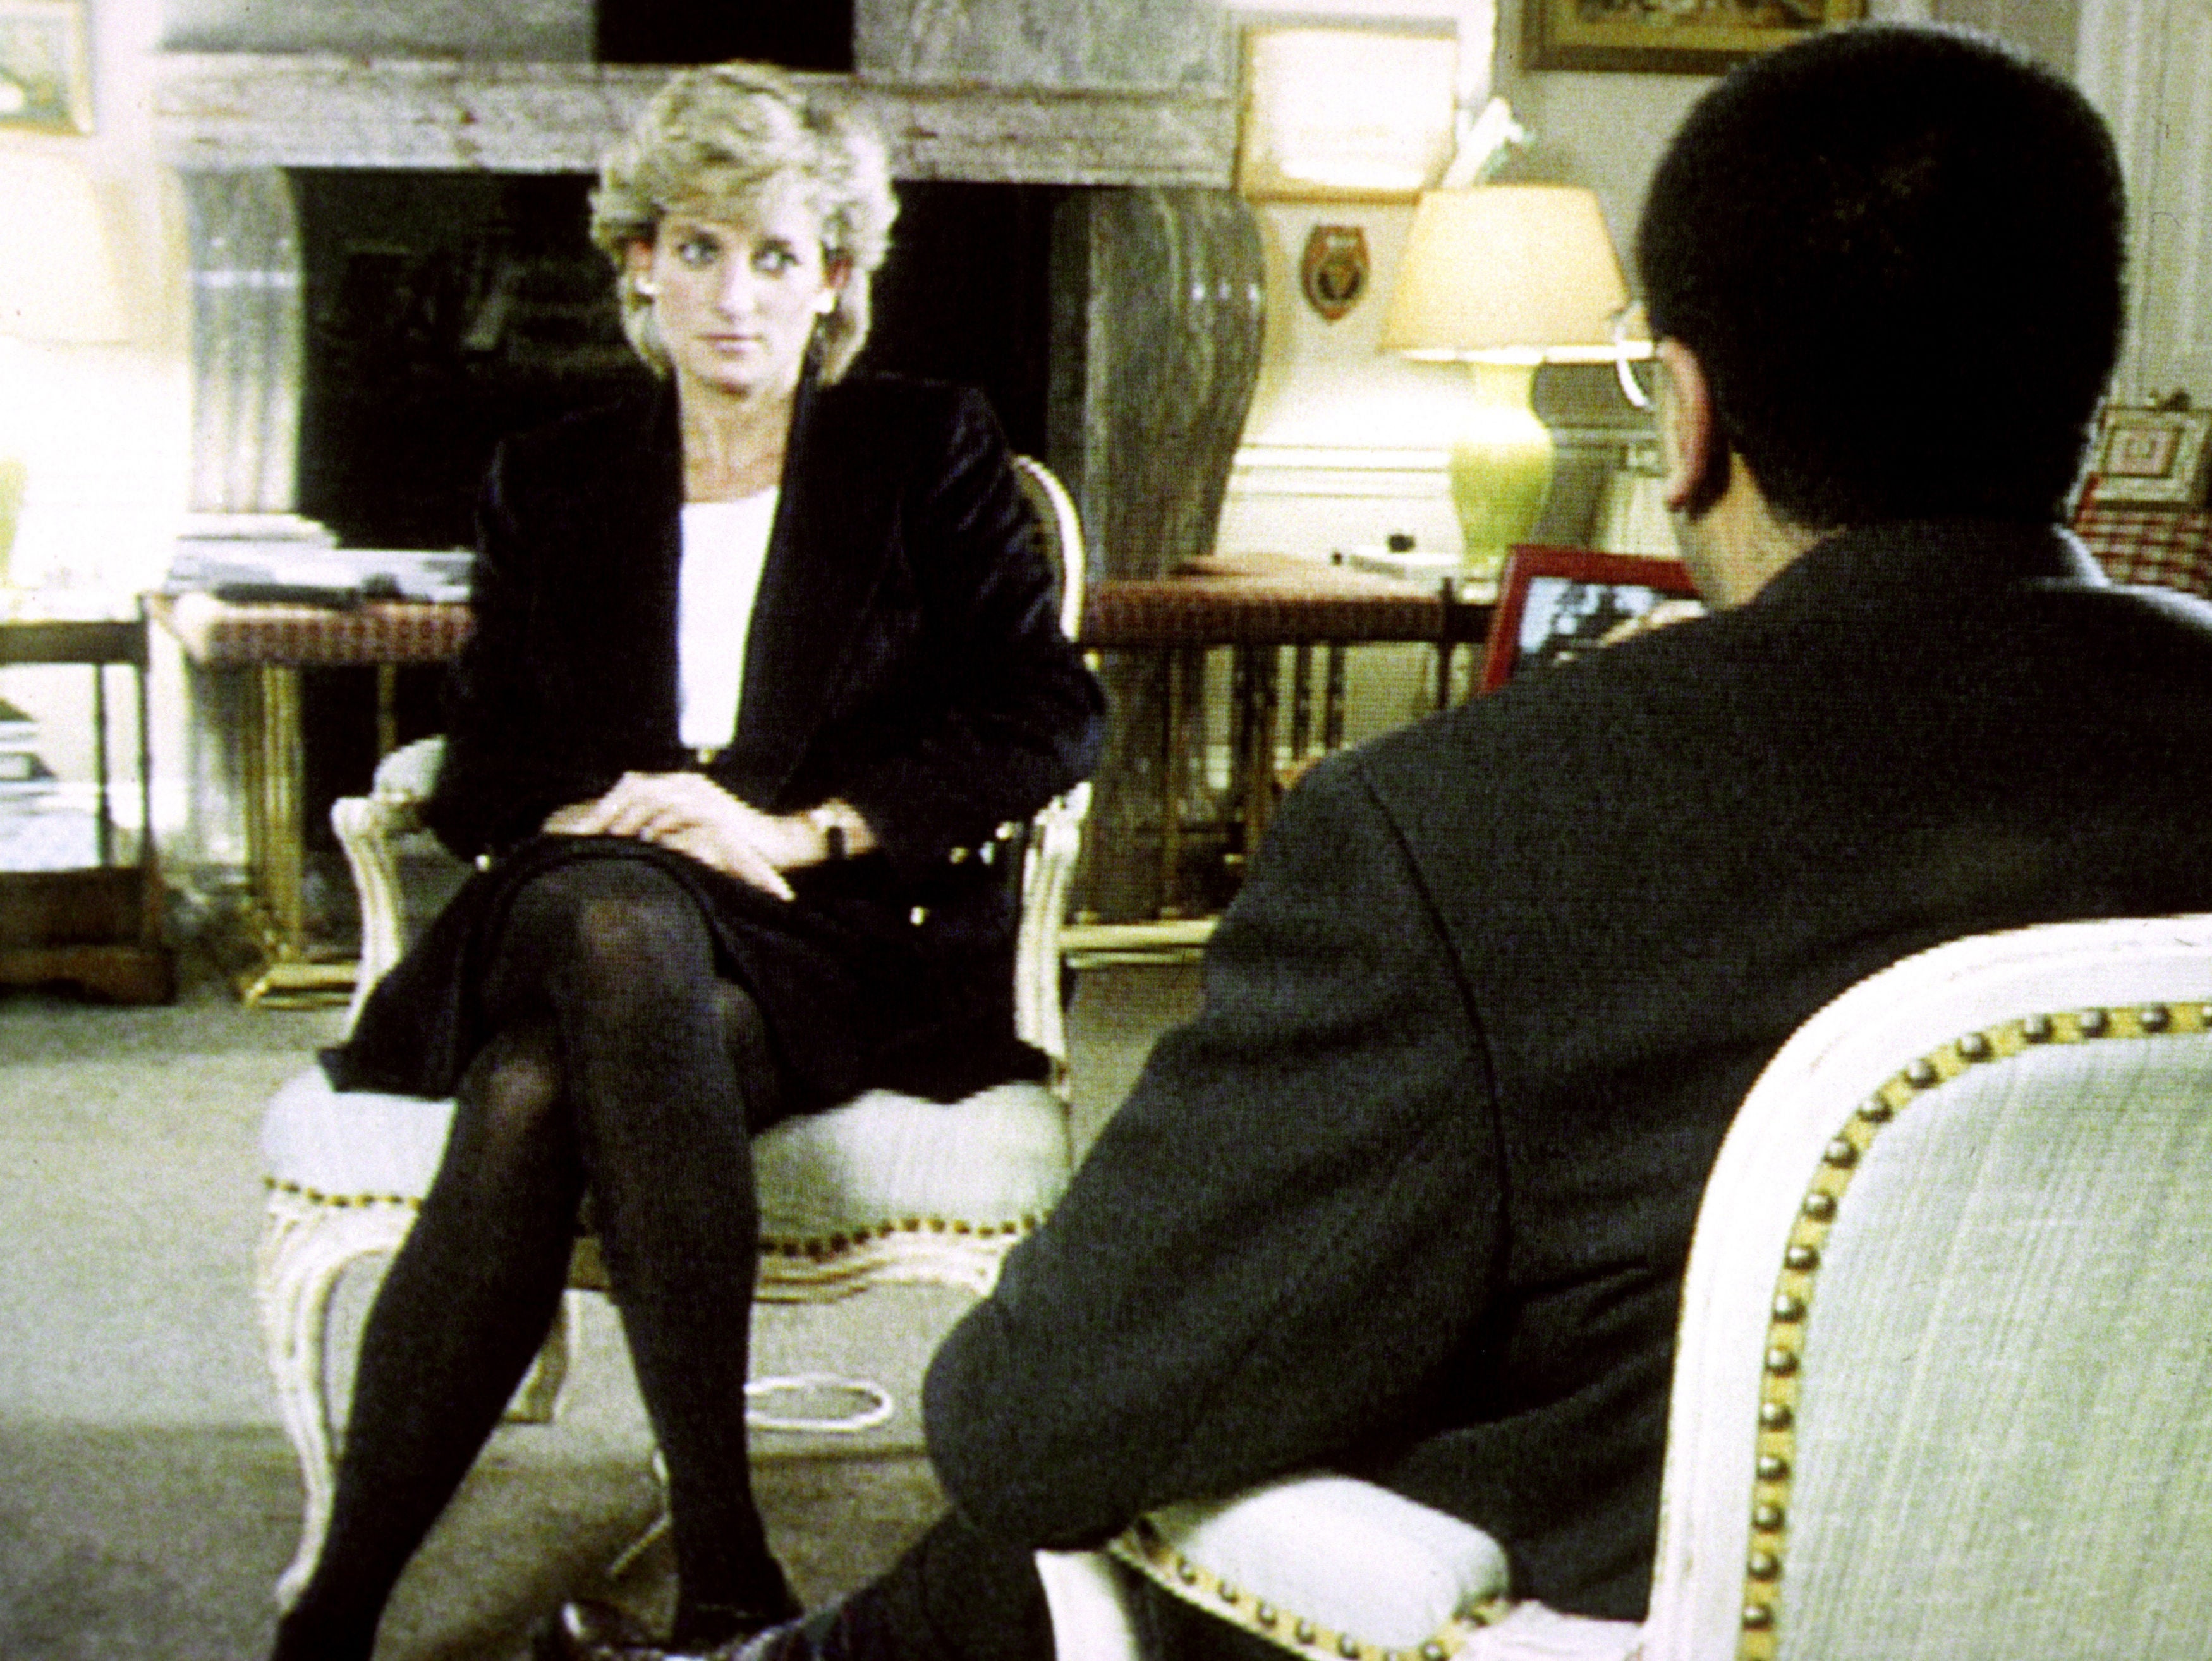 All eyes: Princess Diana during her interview with Martin Bashir